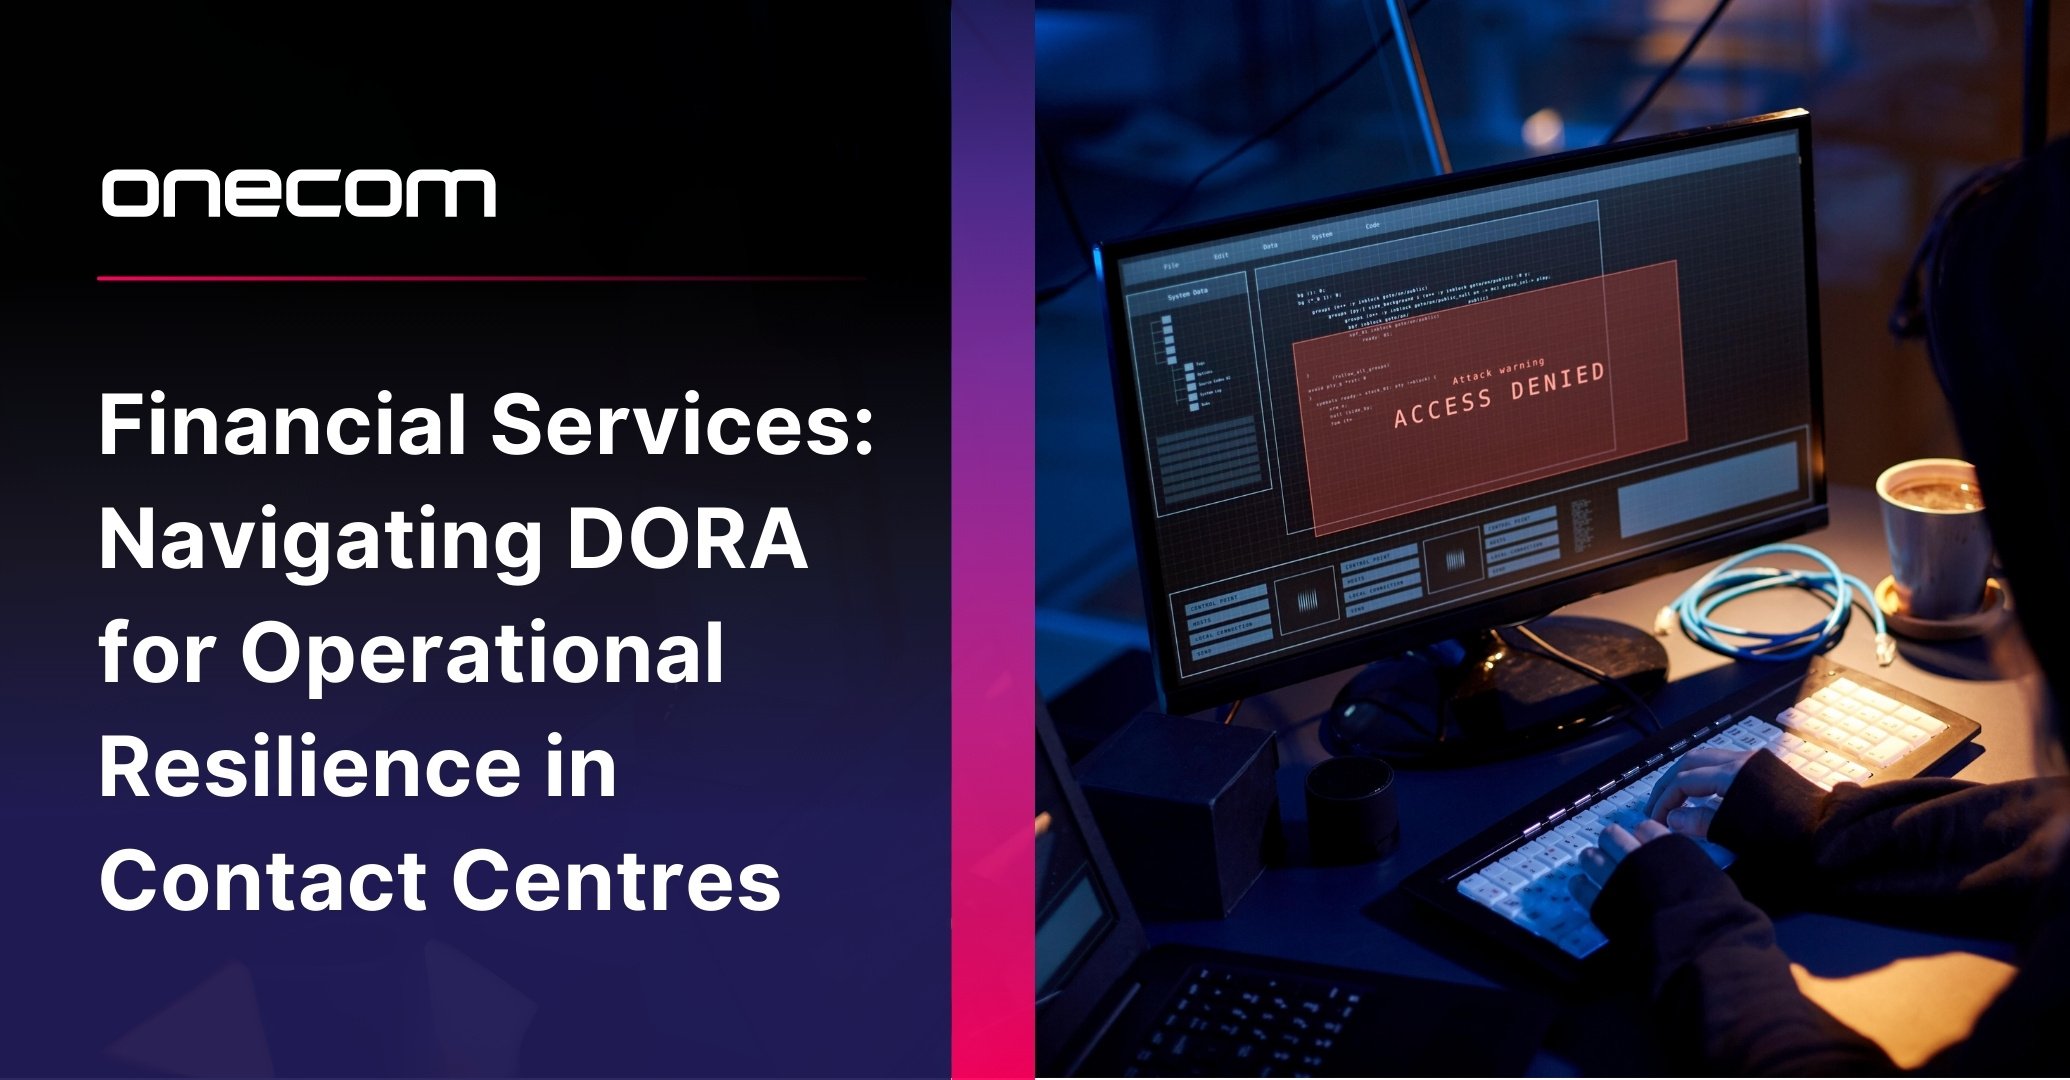 Financial Services: Navigating DORA for Operational Resilience in Contact Centres